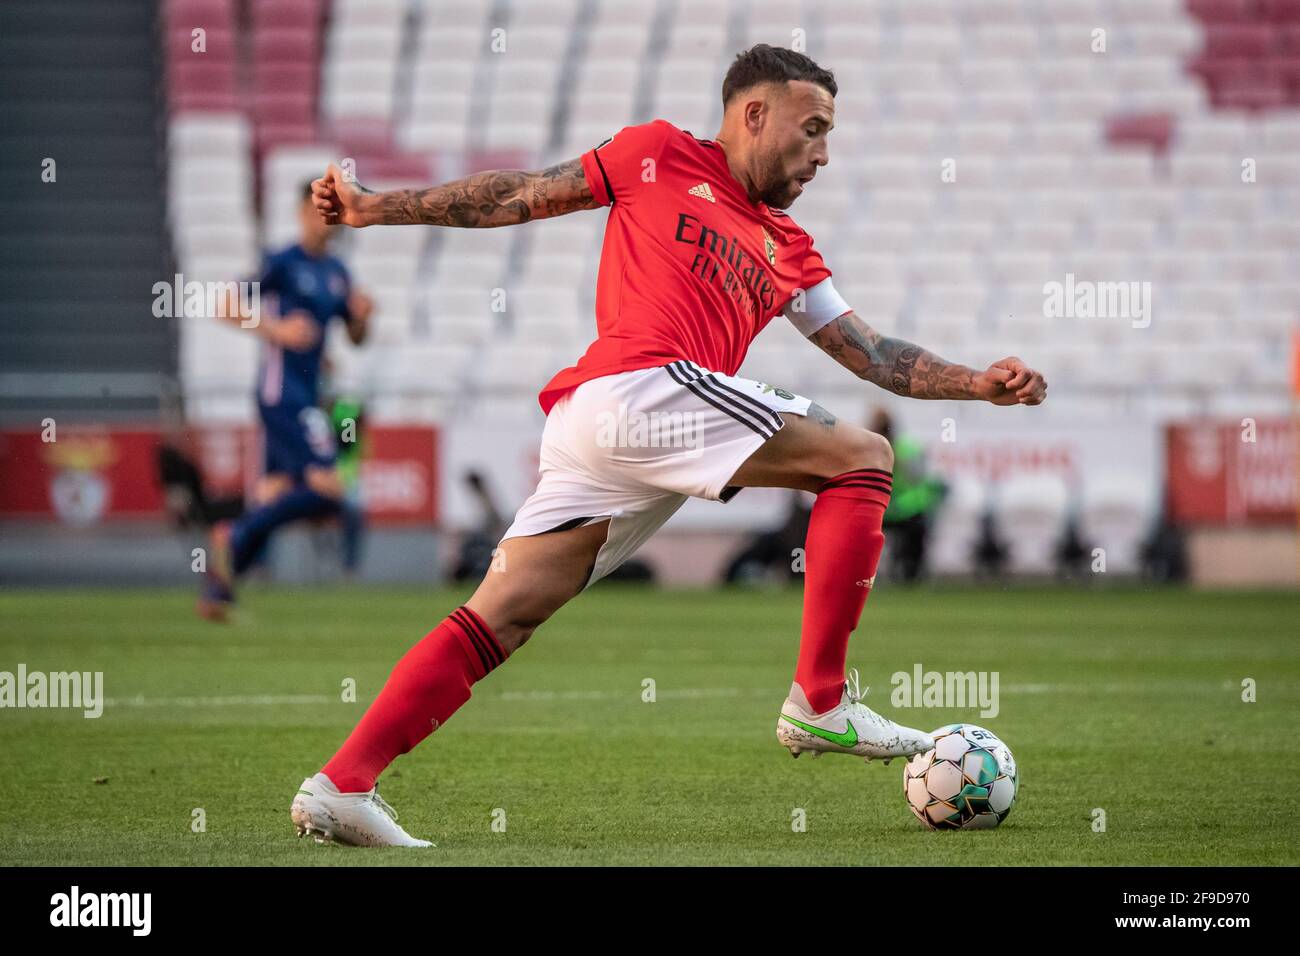 Lisbon, Portugal. 17th Apr, 2021. Otamendi of Benfica during the mens Liga  NOS game between SL Benfica and Gil Vicente at Luz Stadium in Lisbon,  Portugal on April 17, 2021 Credit: SPP